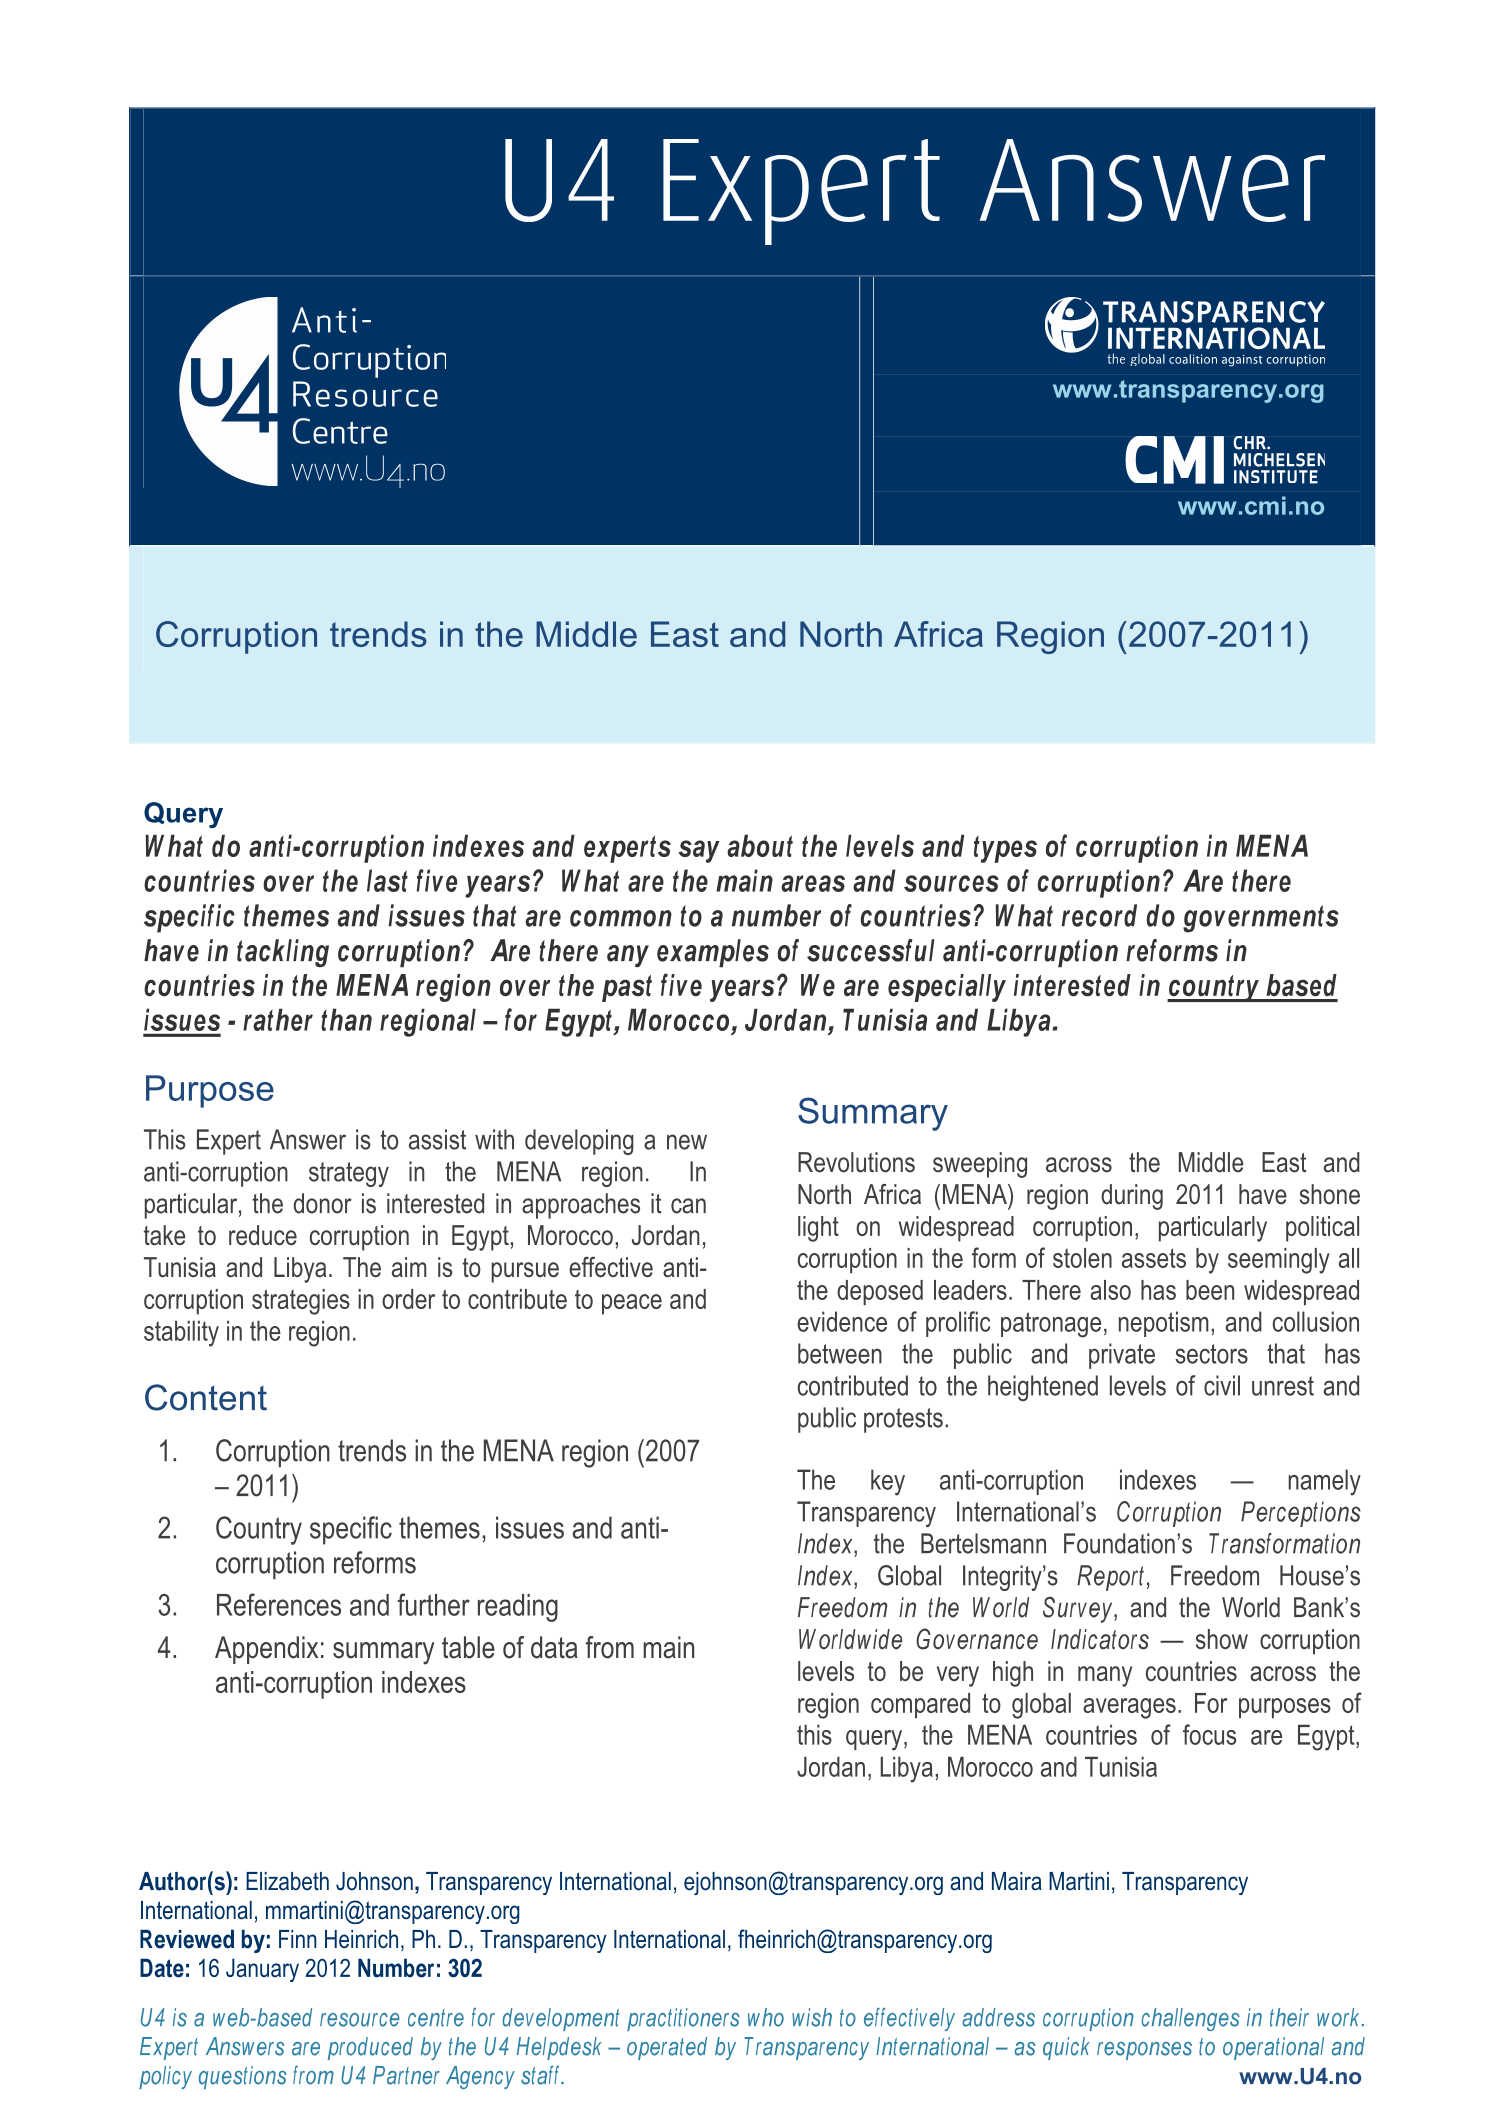 Corruption trends in the Middle East and North Africa Region (2007-2011)